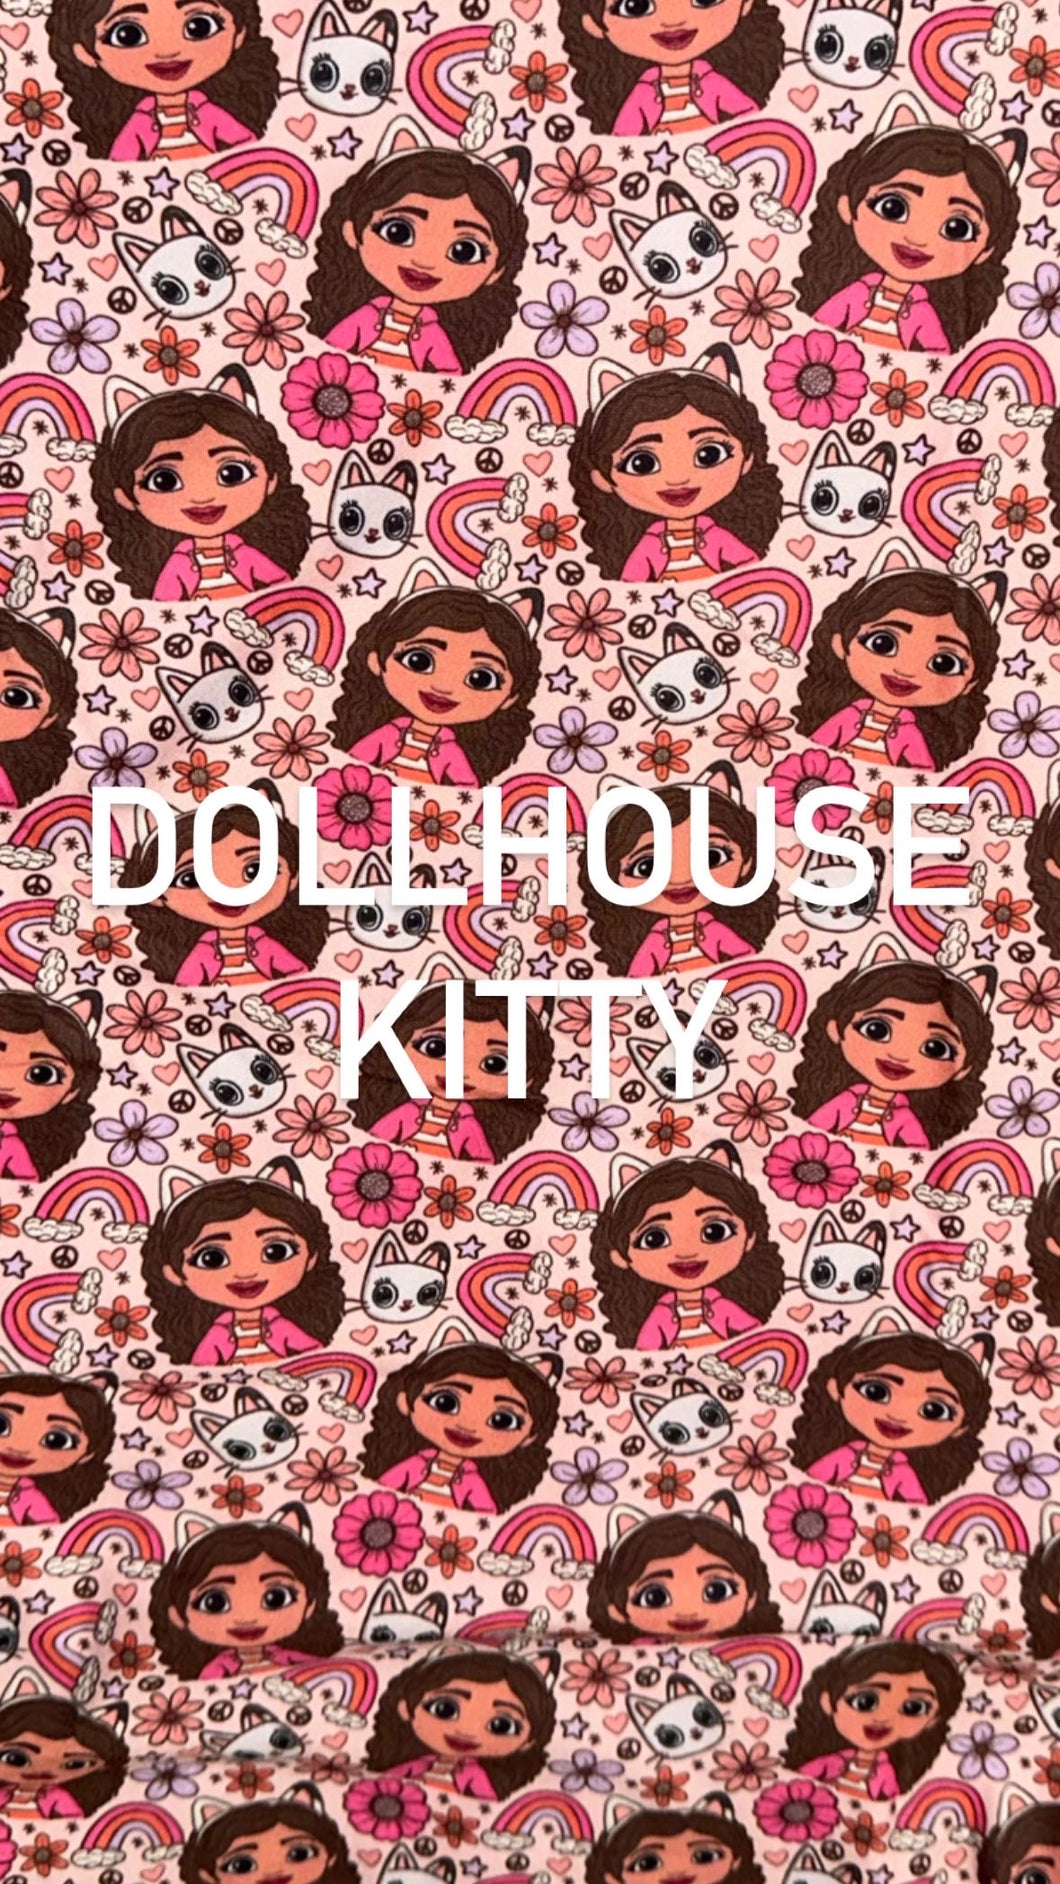 Dollhouse Kitty (Multiple Product Options)